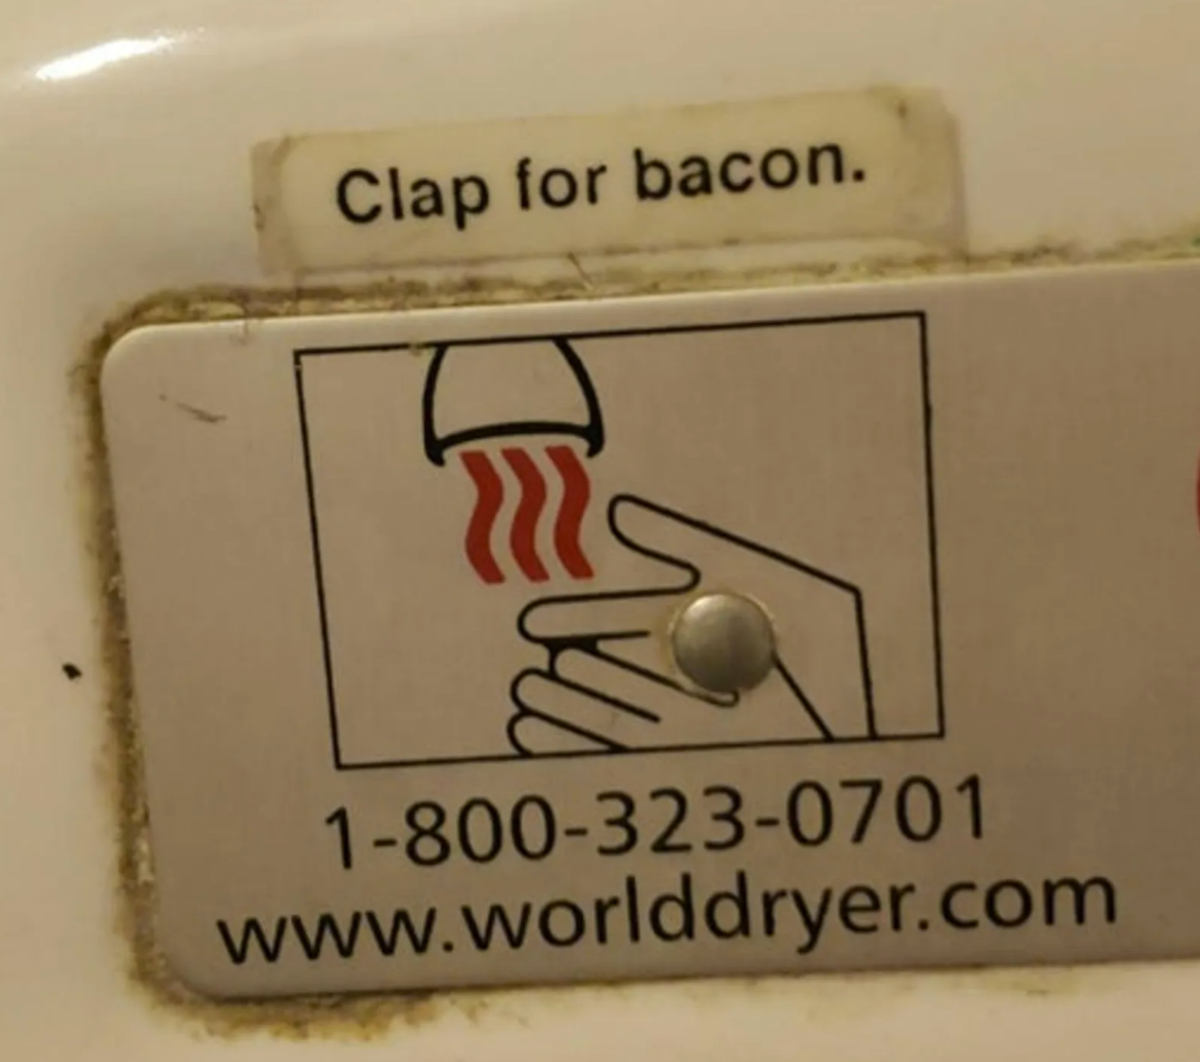 clap for bacon.png